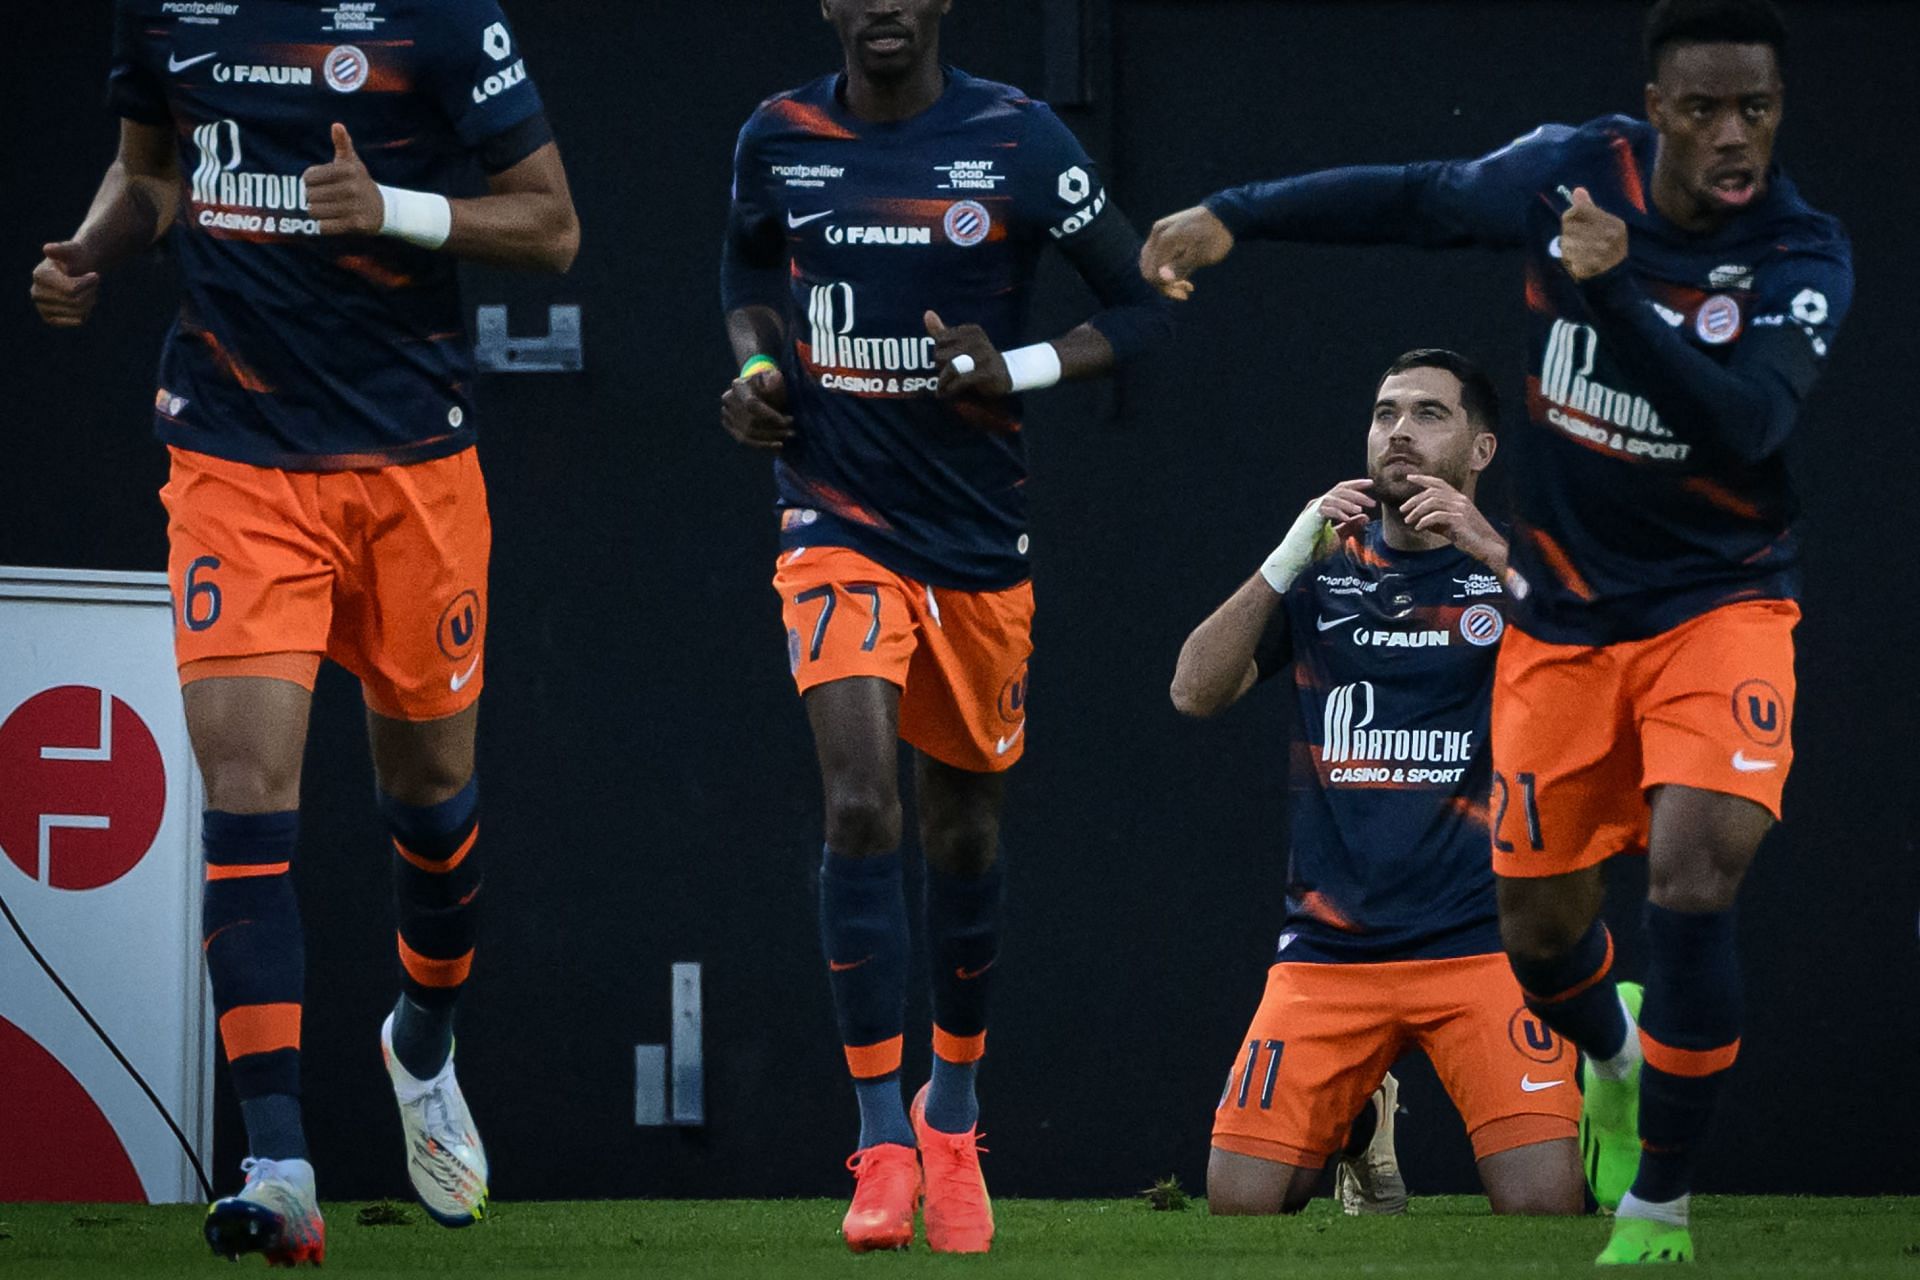 Montpellier will face Pau on Friday - Coupe de France